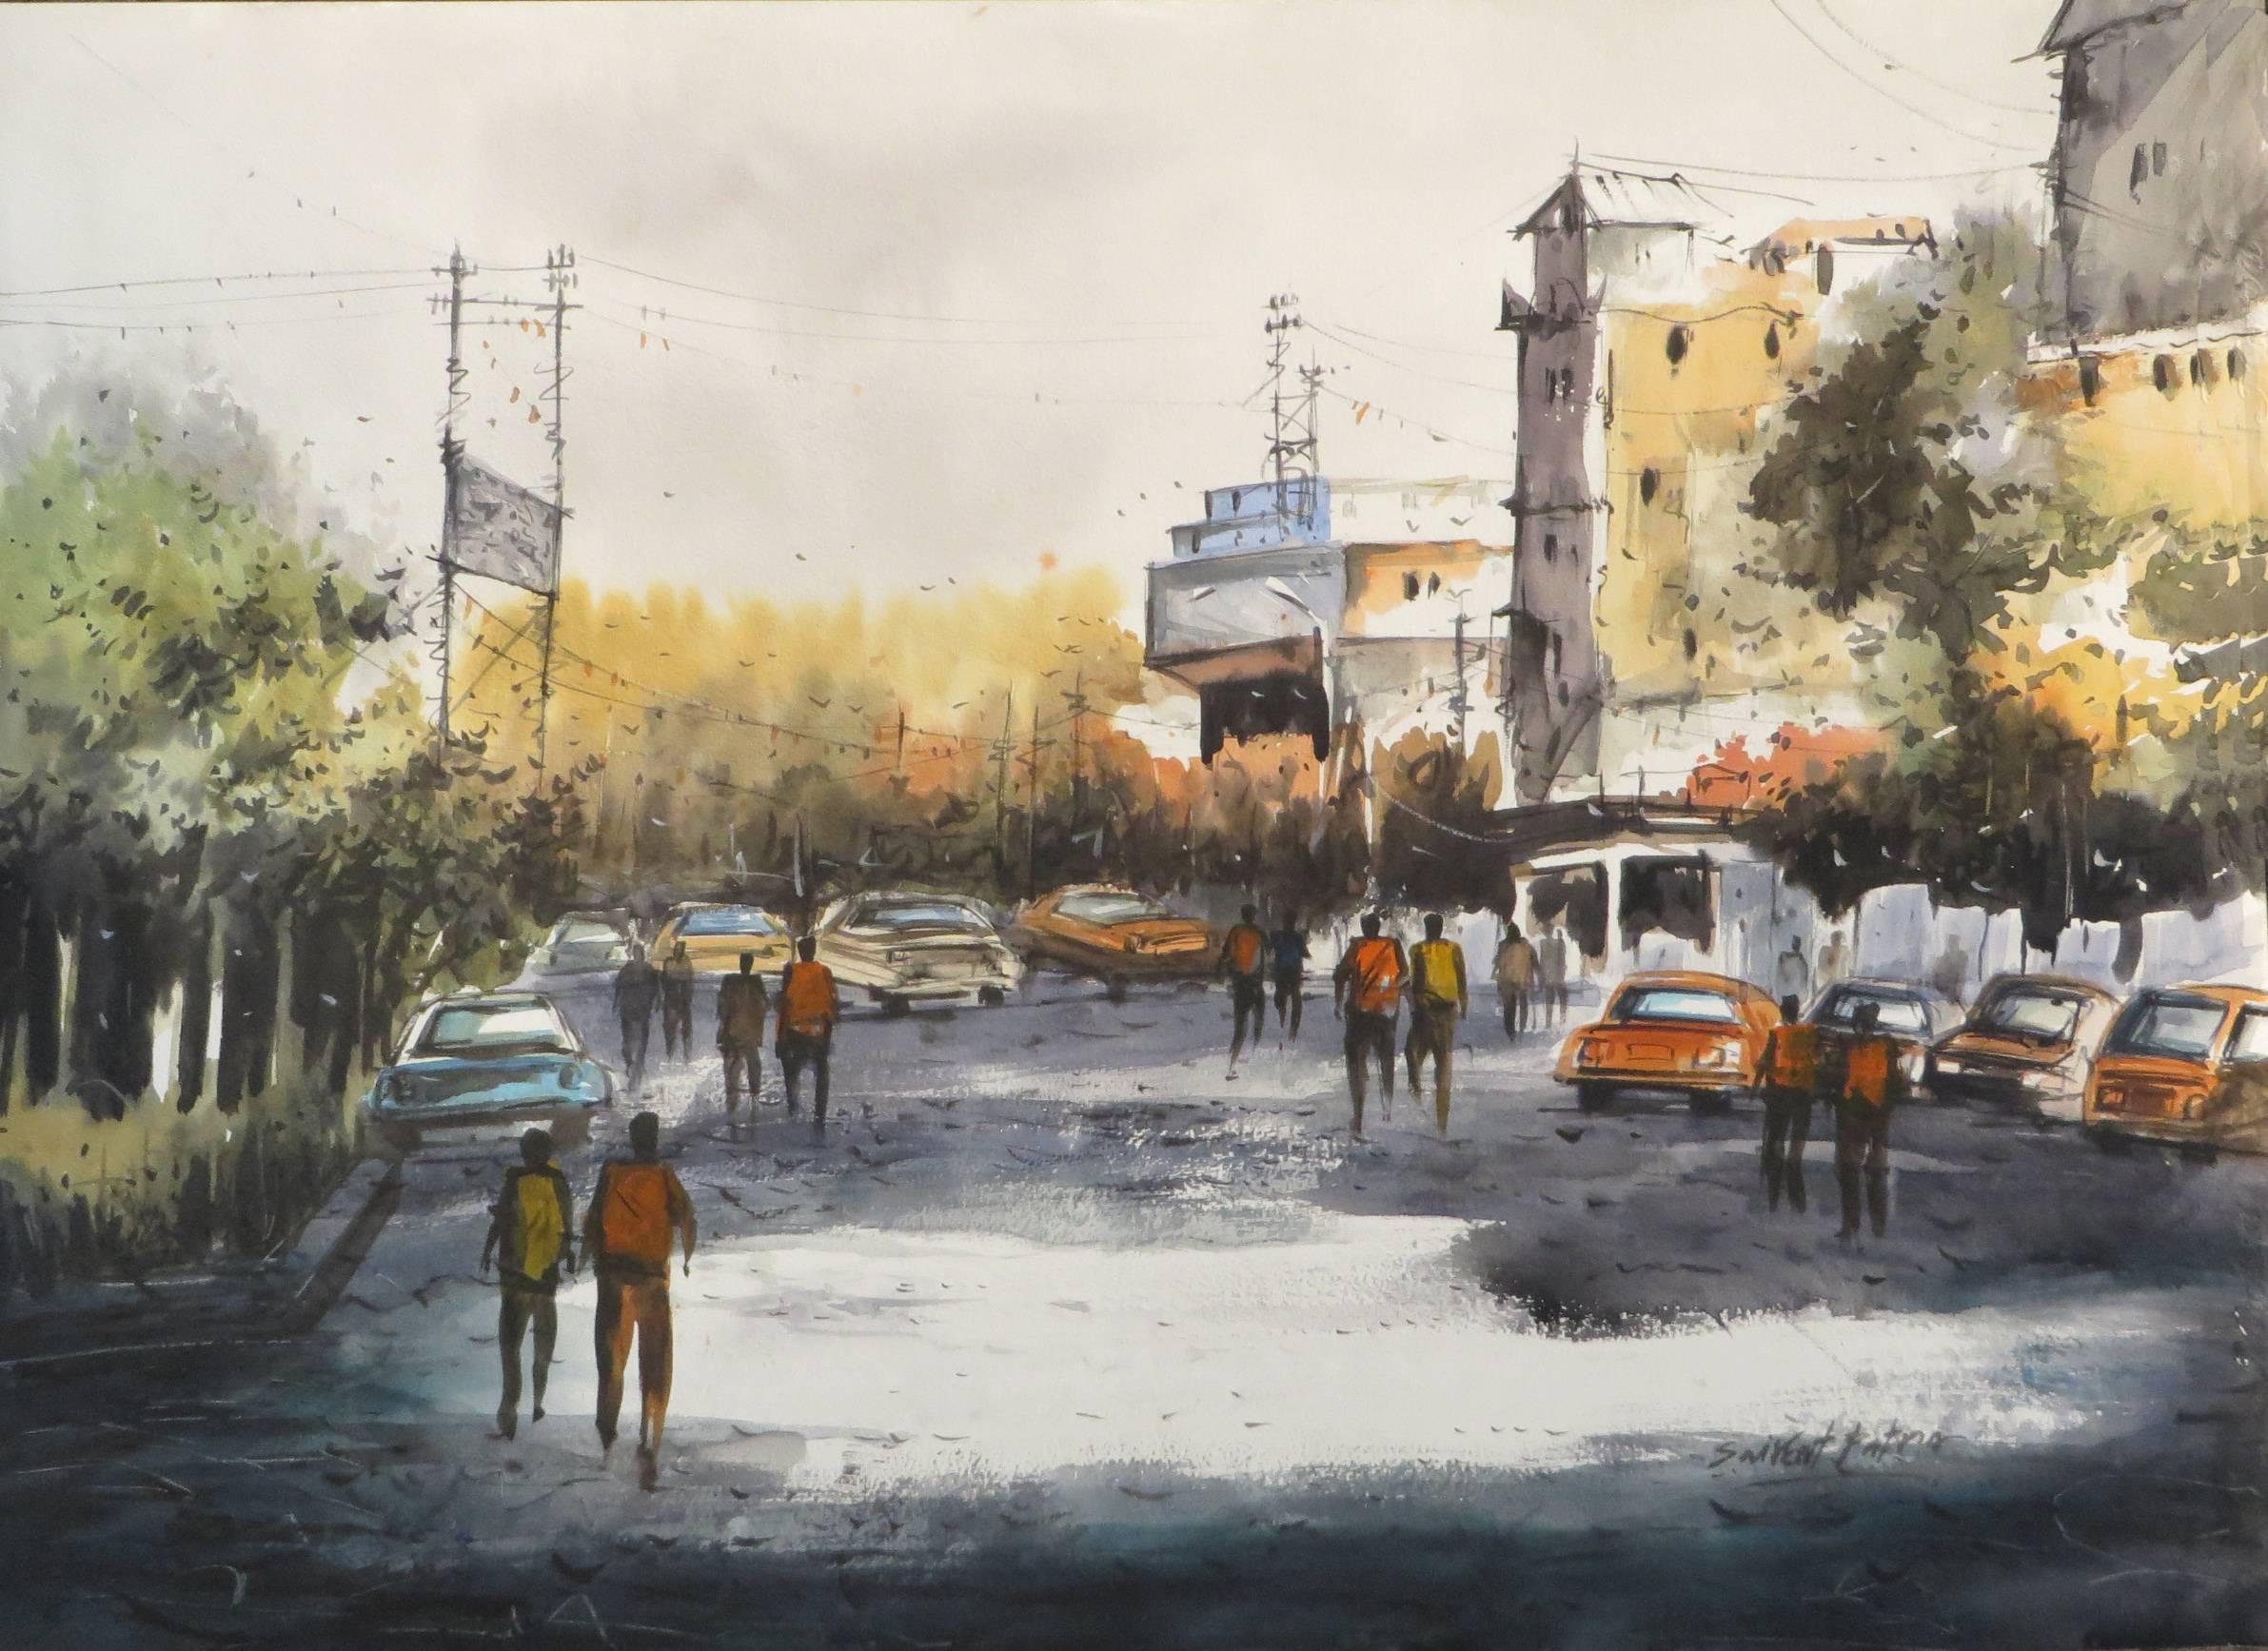 Saikat Patra Figurative Painting - City Scape, City Life, Car, Watercolor on Paper by Indian Artist "In Stock"